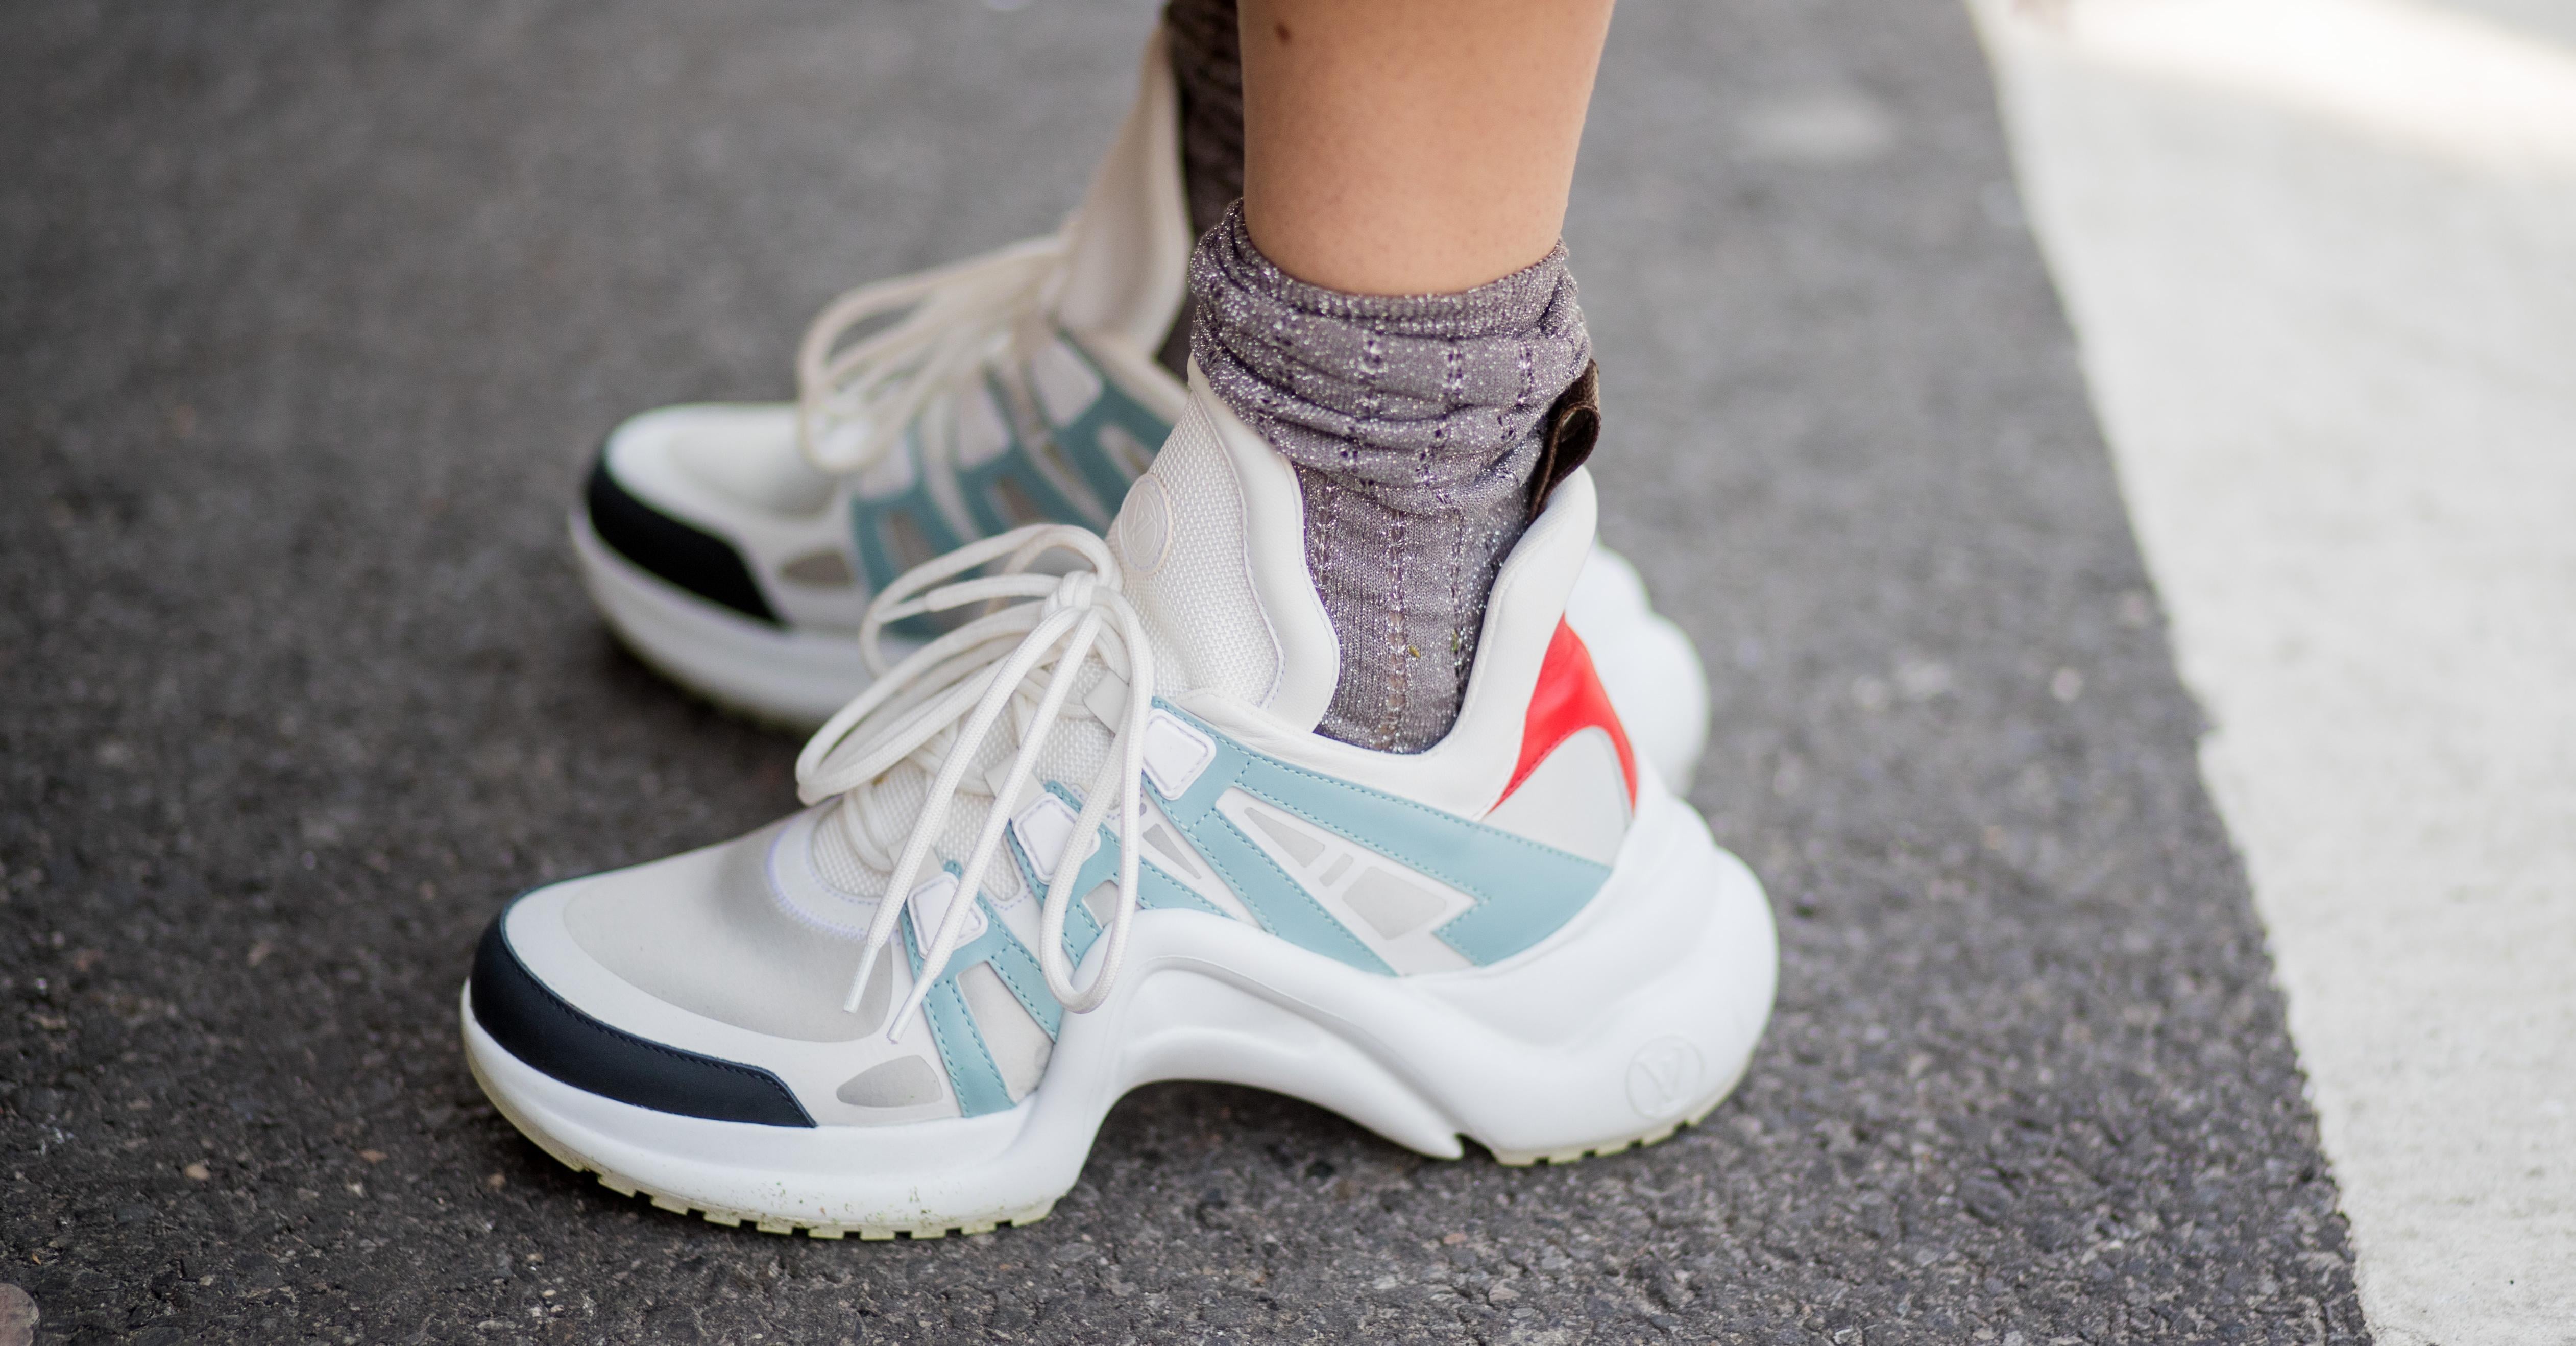 Louis Vuitton Archlight: A closer look at the dad sneaker of the